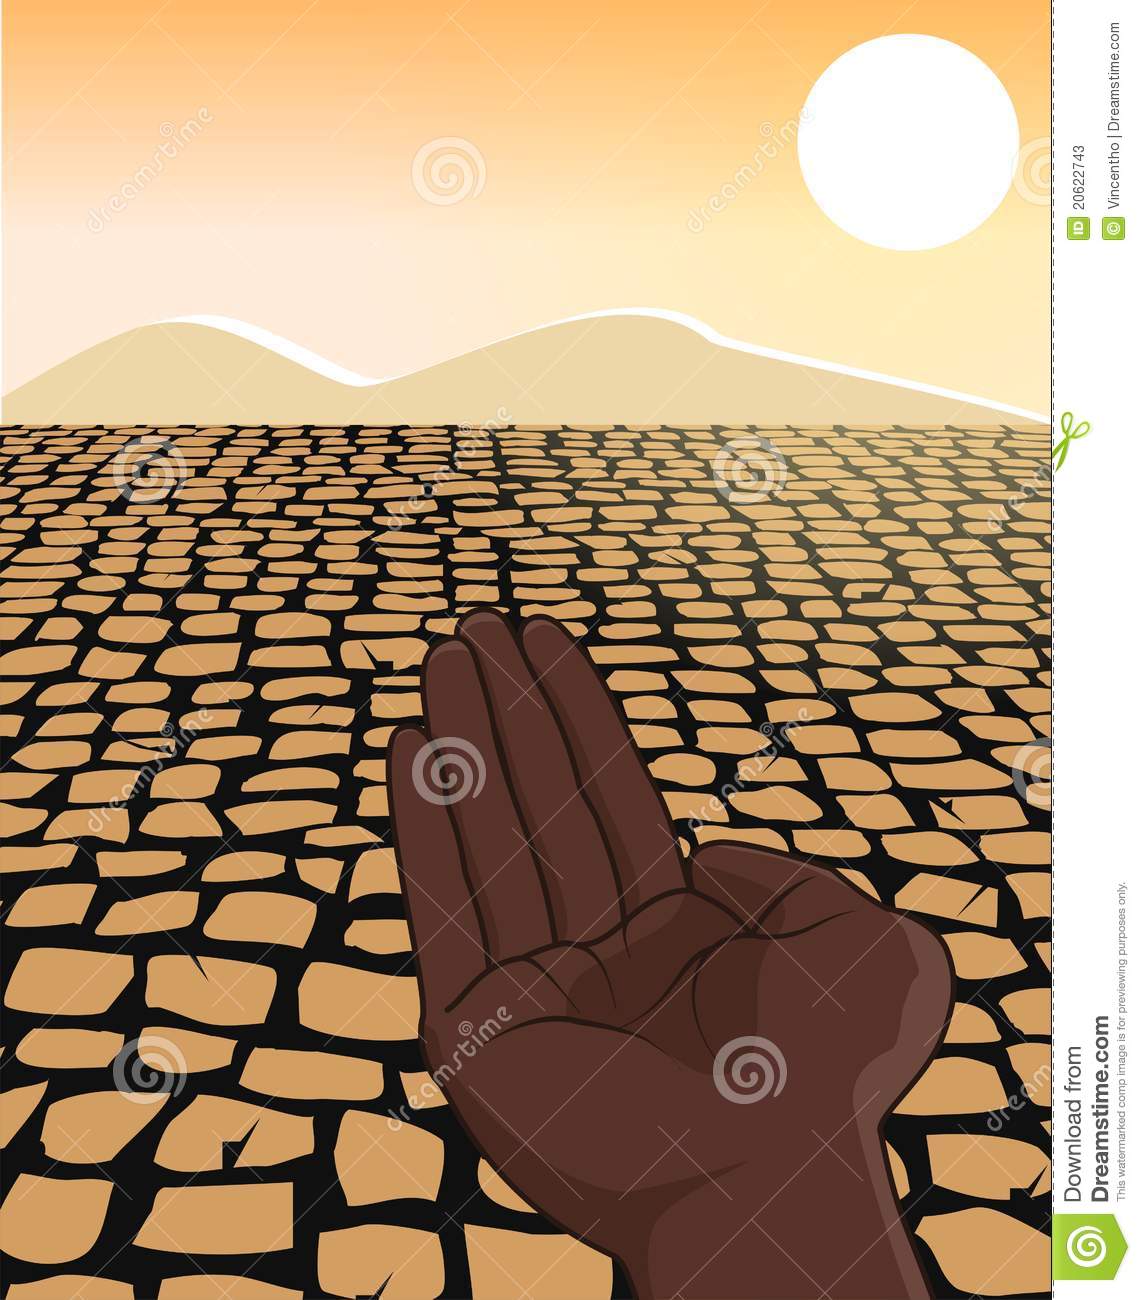 Africa Drought Famine Refugee Concept Illustration Stock Photos